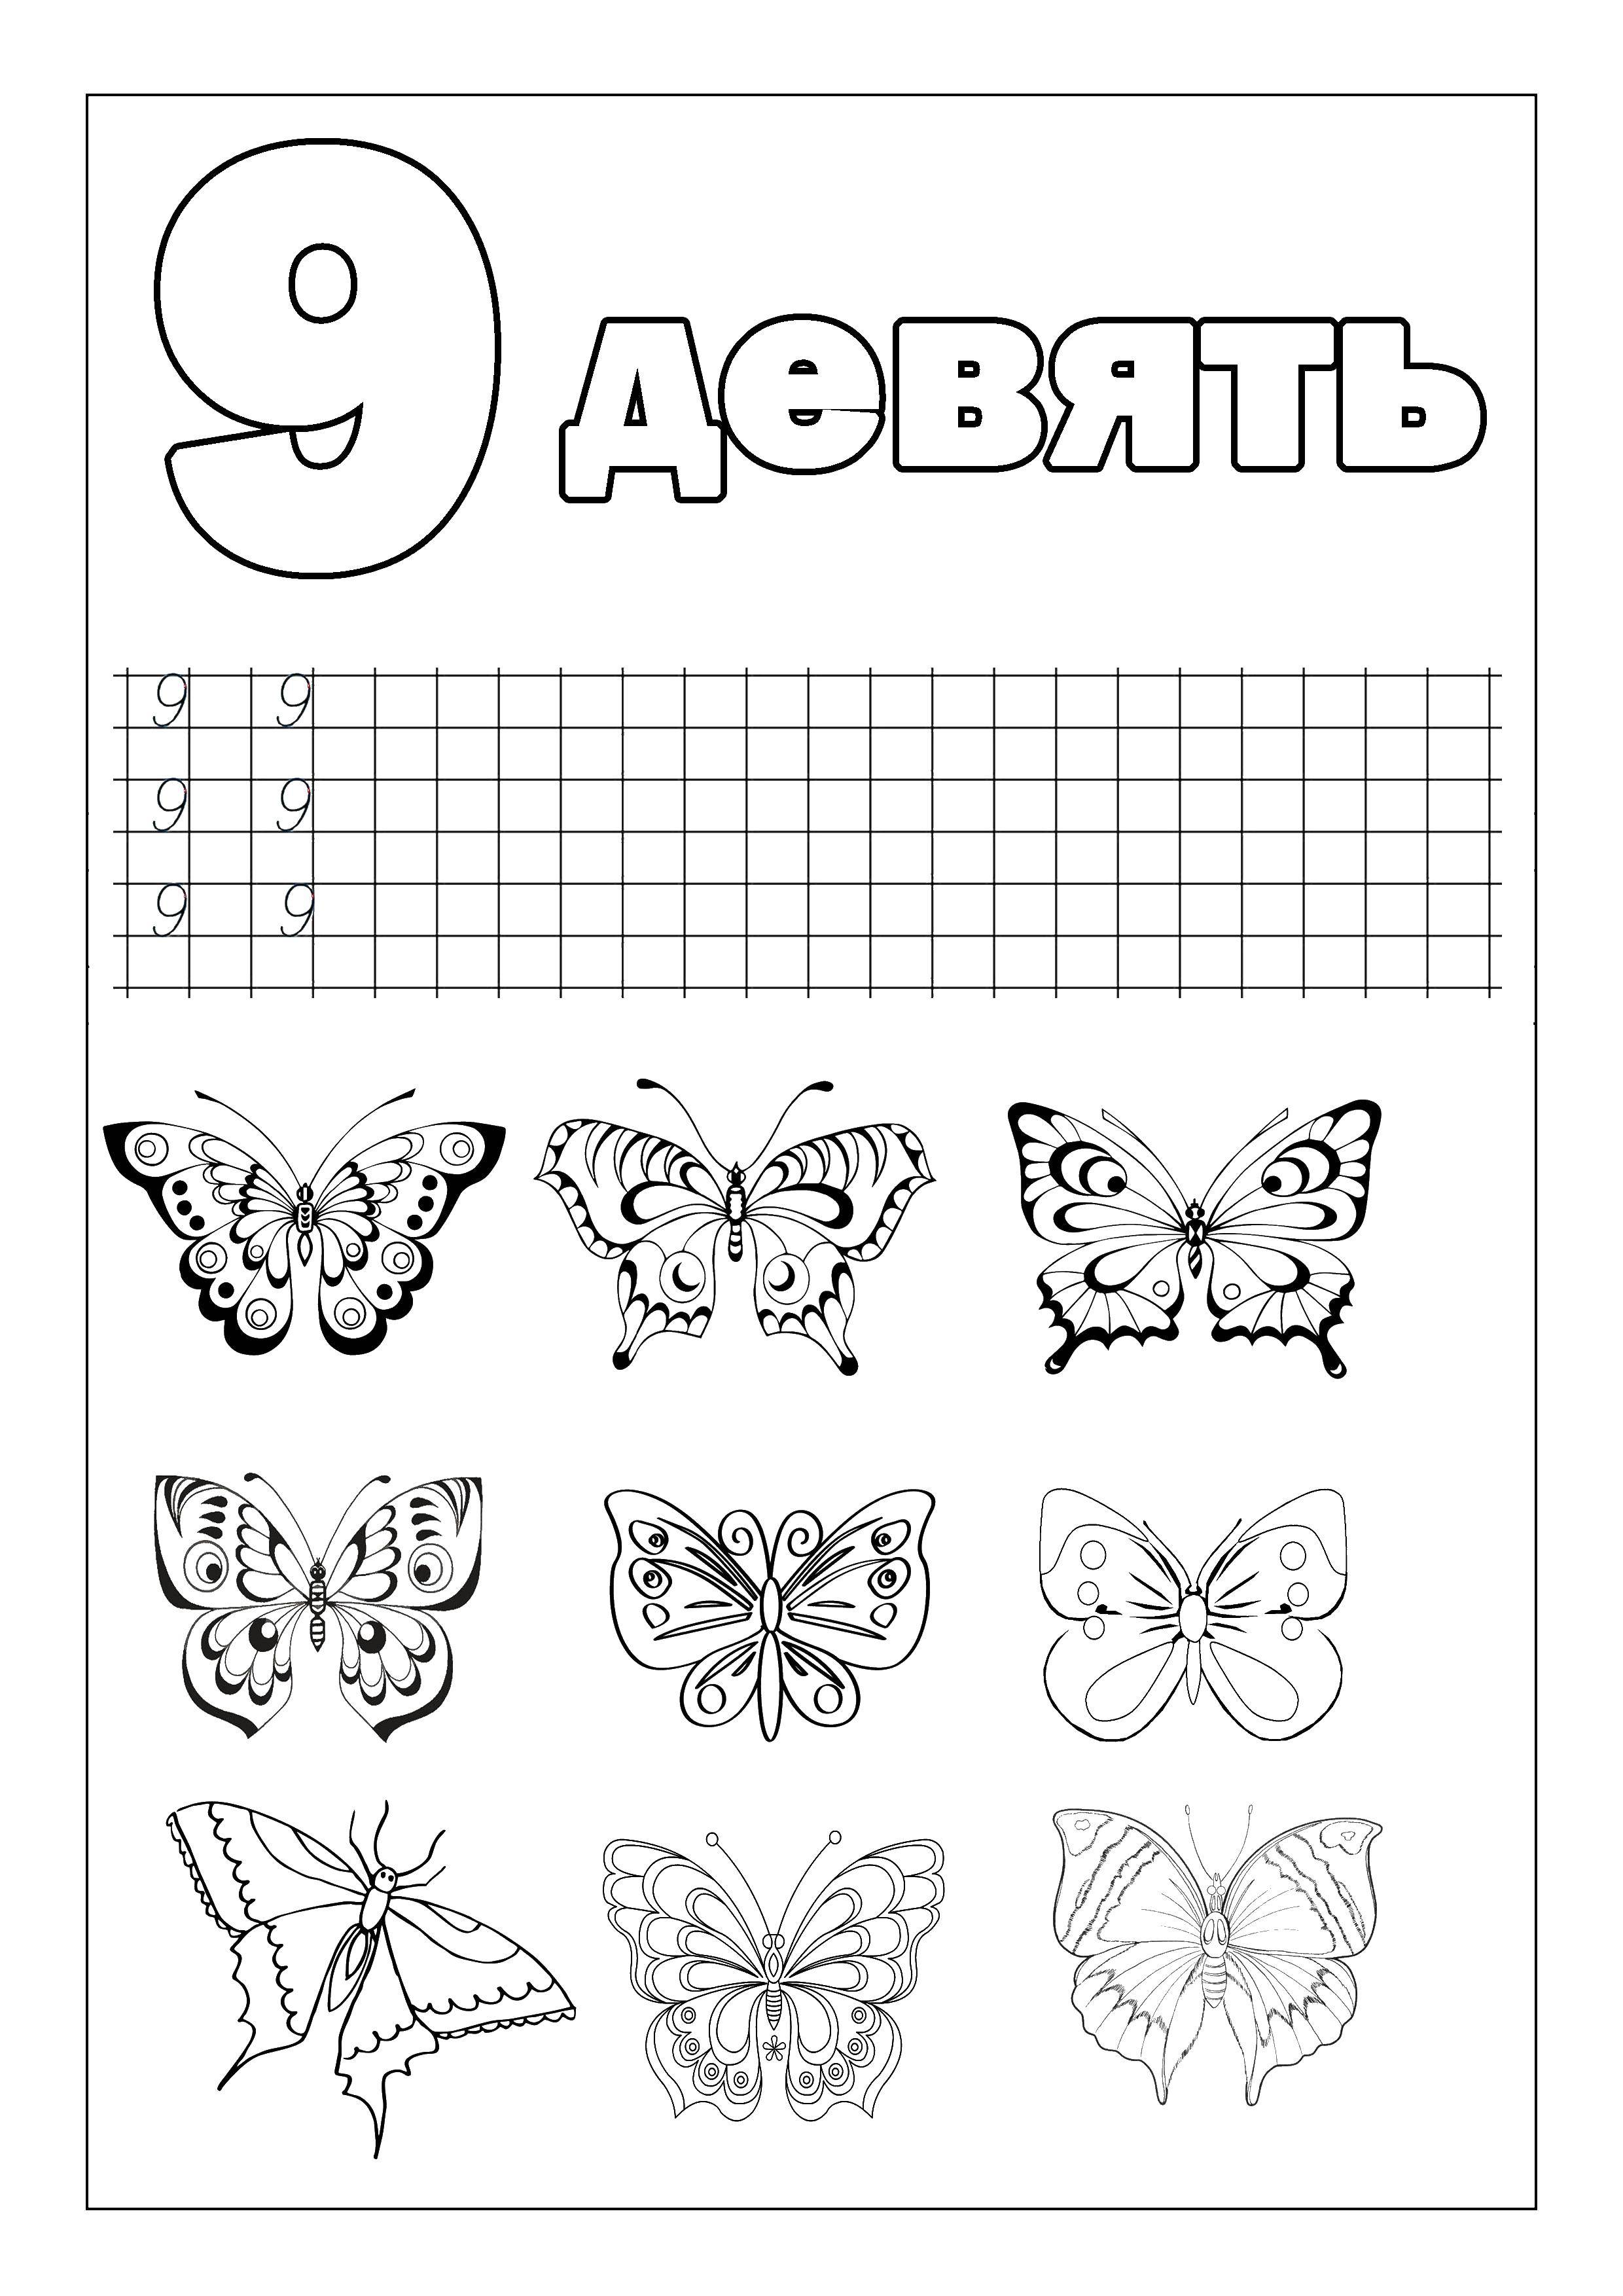 Coloring Recipe numbers 9. Category tracing numbers. Tags:  the recipe, 9, figure, butterflies.